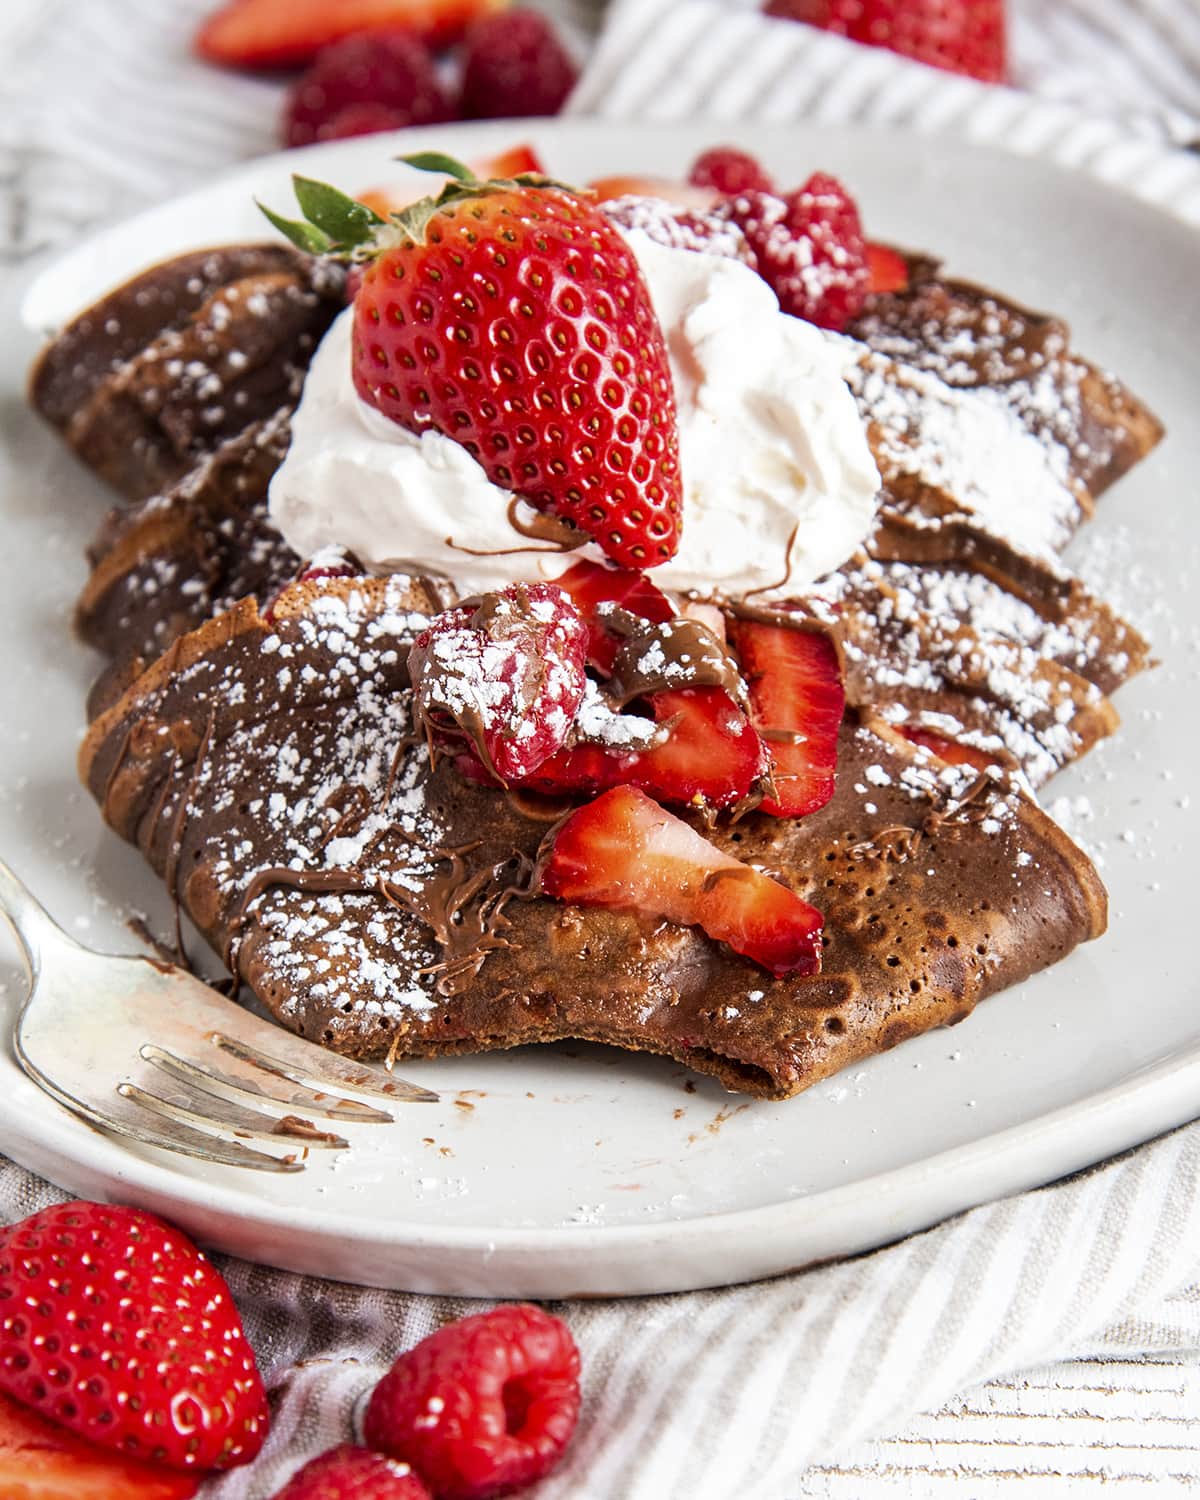 A plate of folded up chocolate crepes with a bite missing from one in the front.